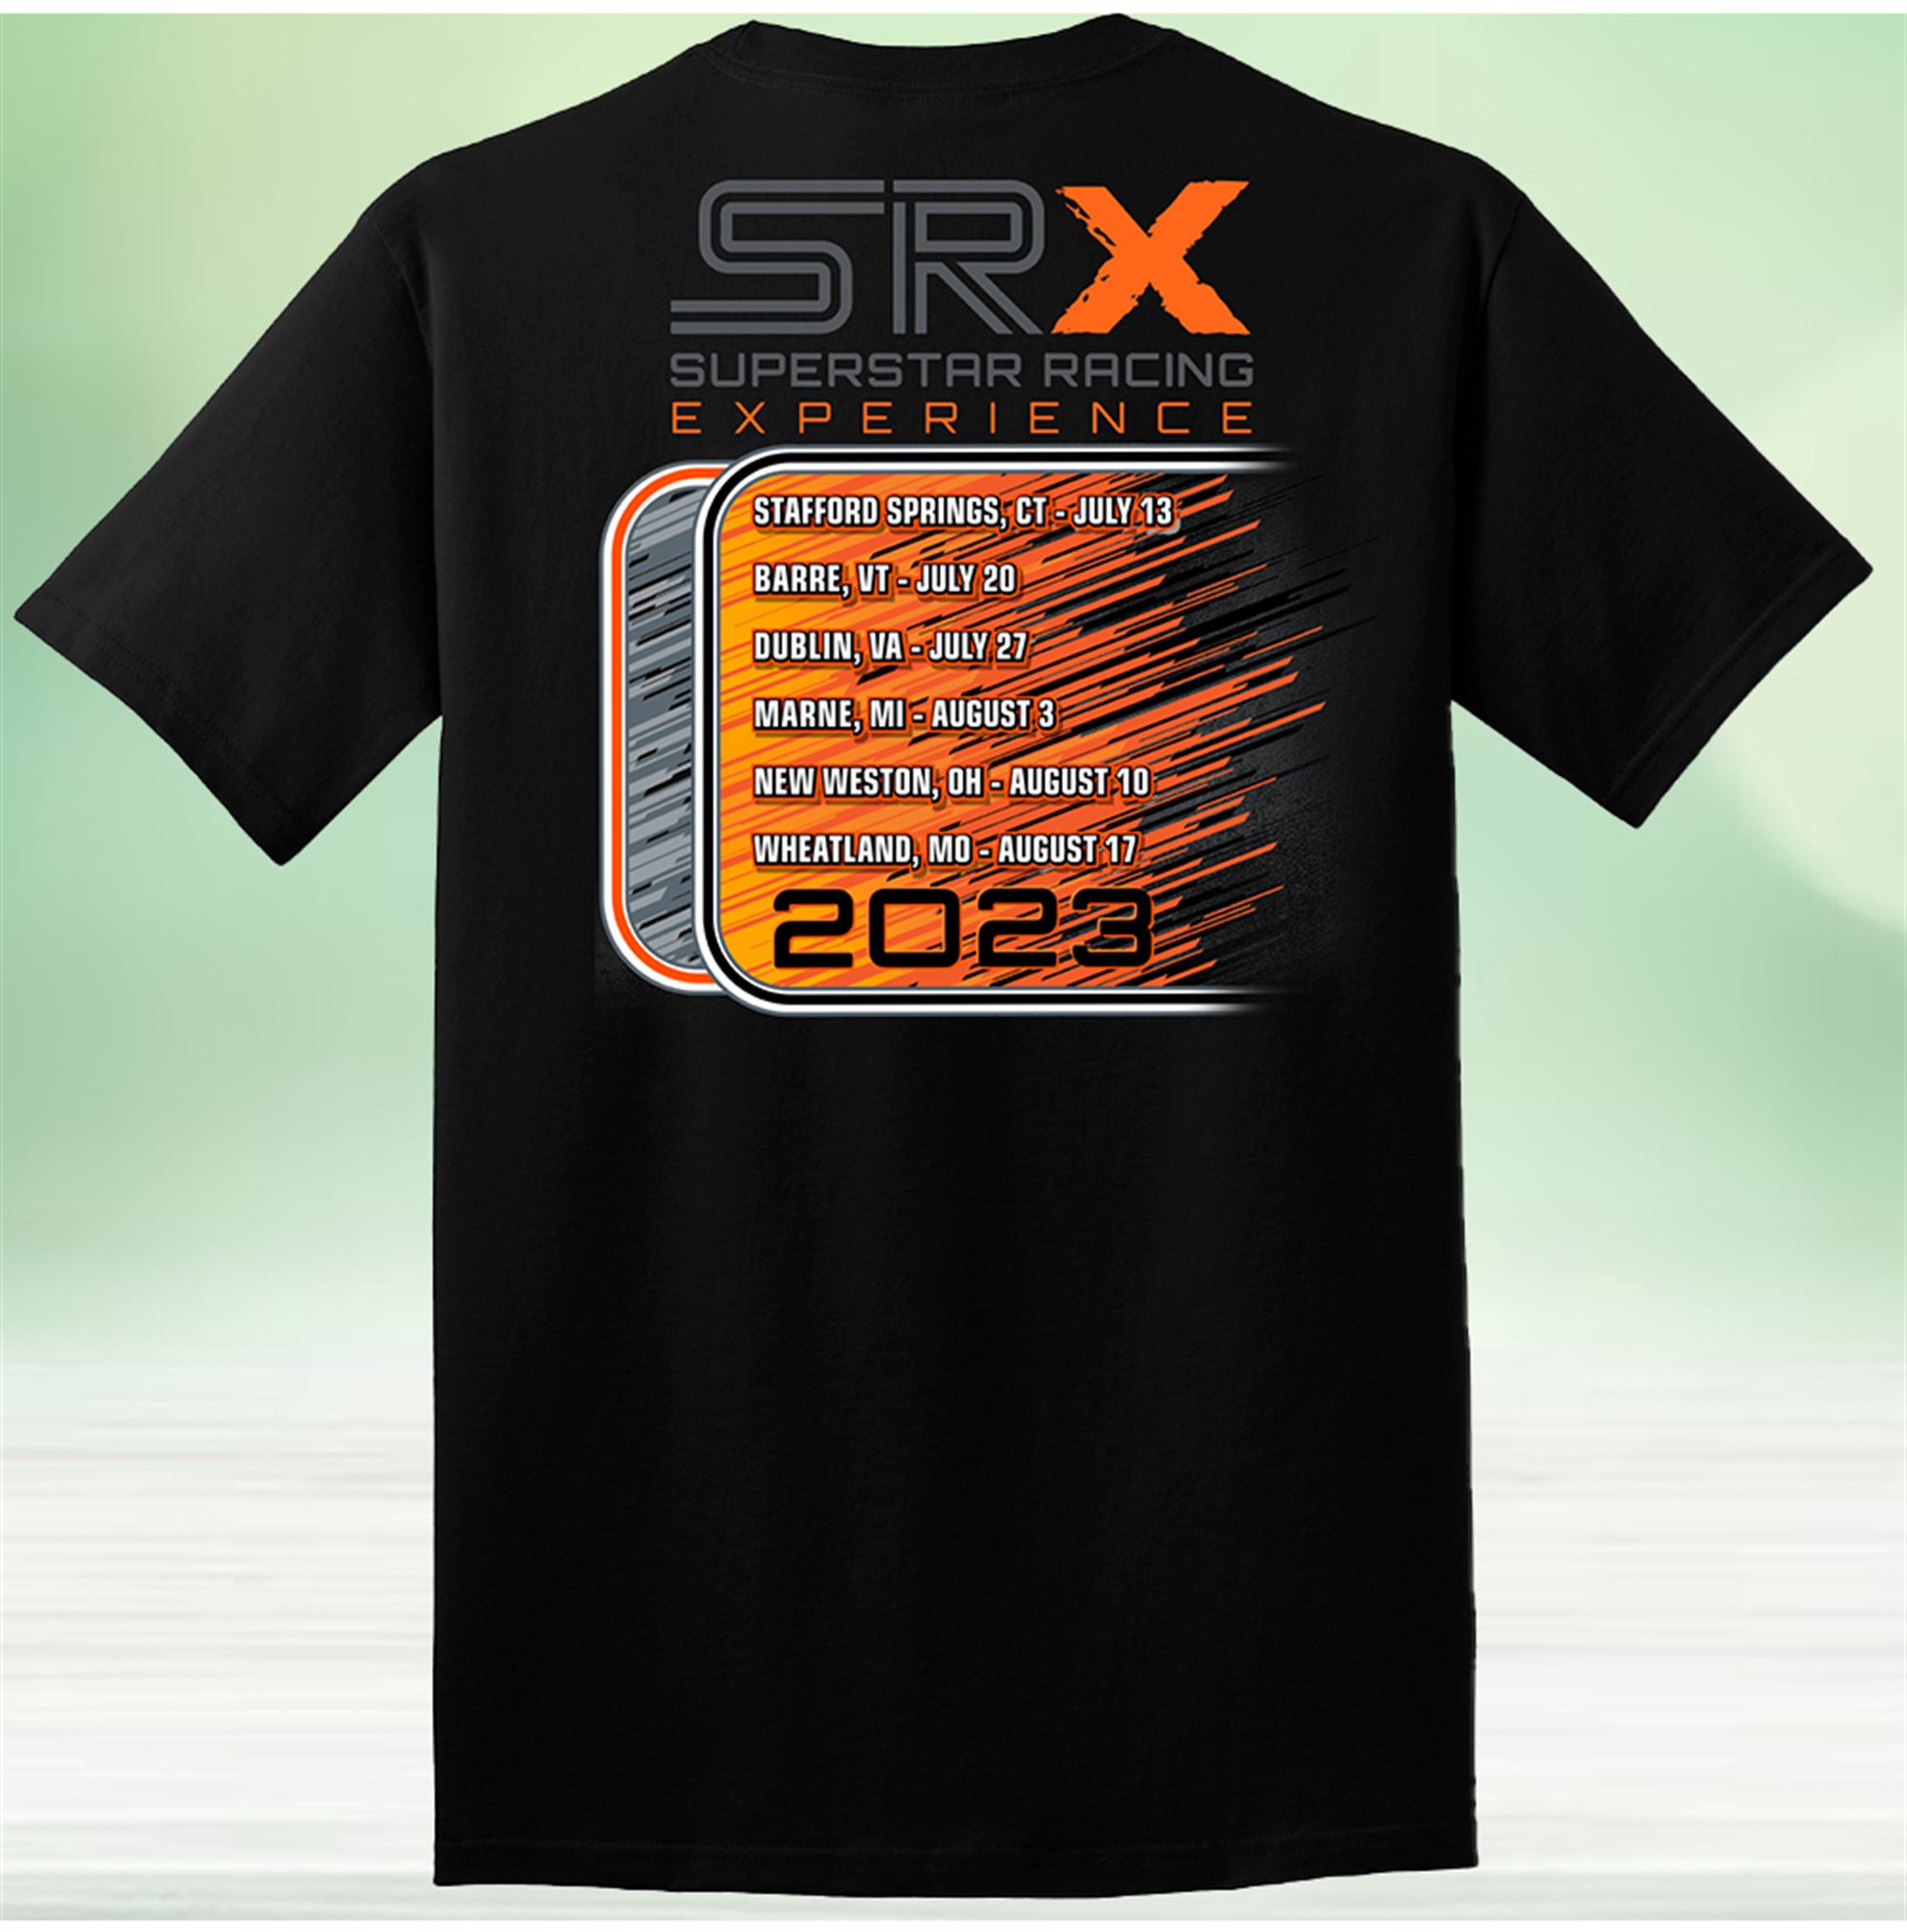 Srx Schedule 2023 Superstar Racing Experience Shirt Shibtee Clothing